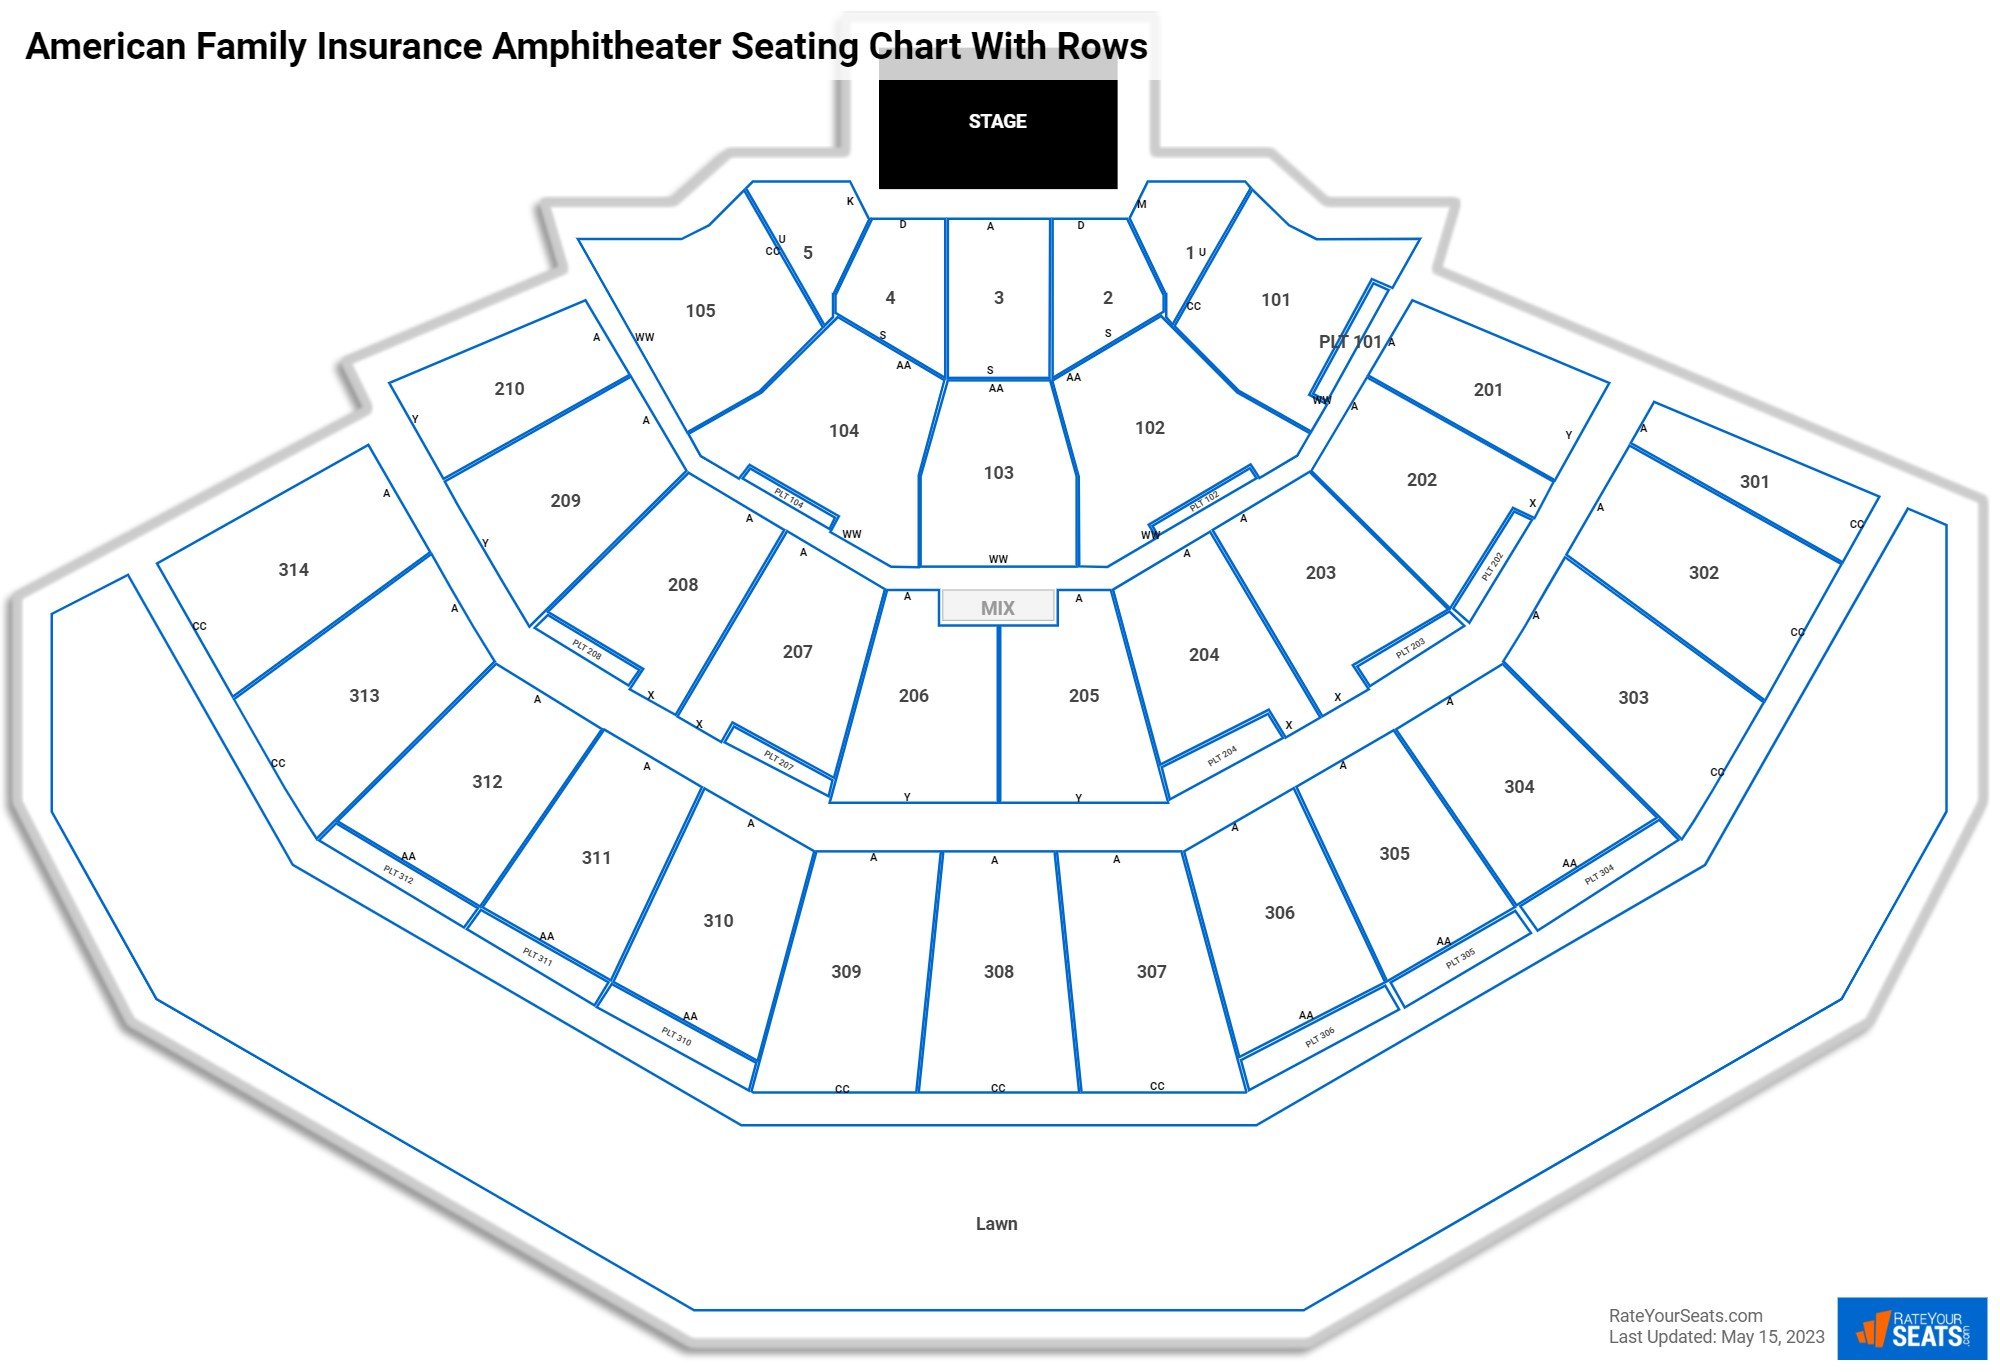 American Family Insurance Amphitheater seating chart with row numbers